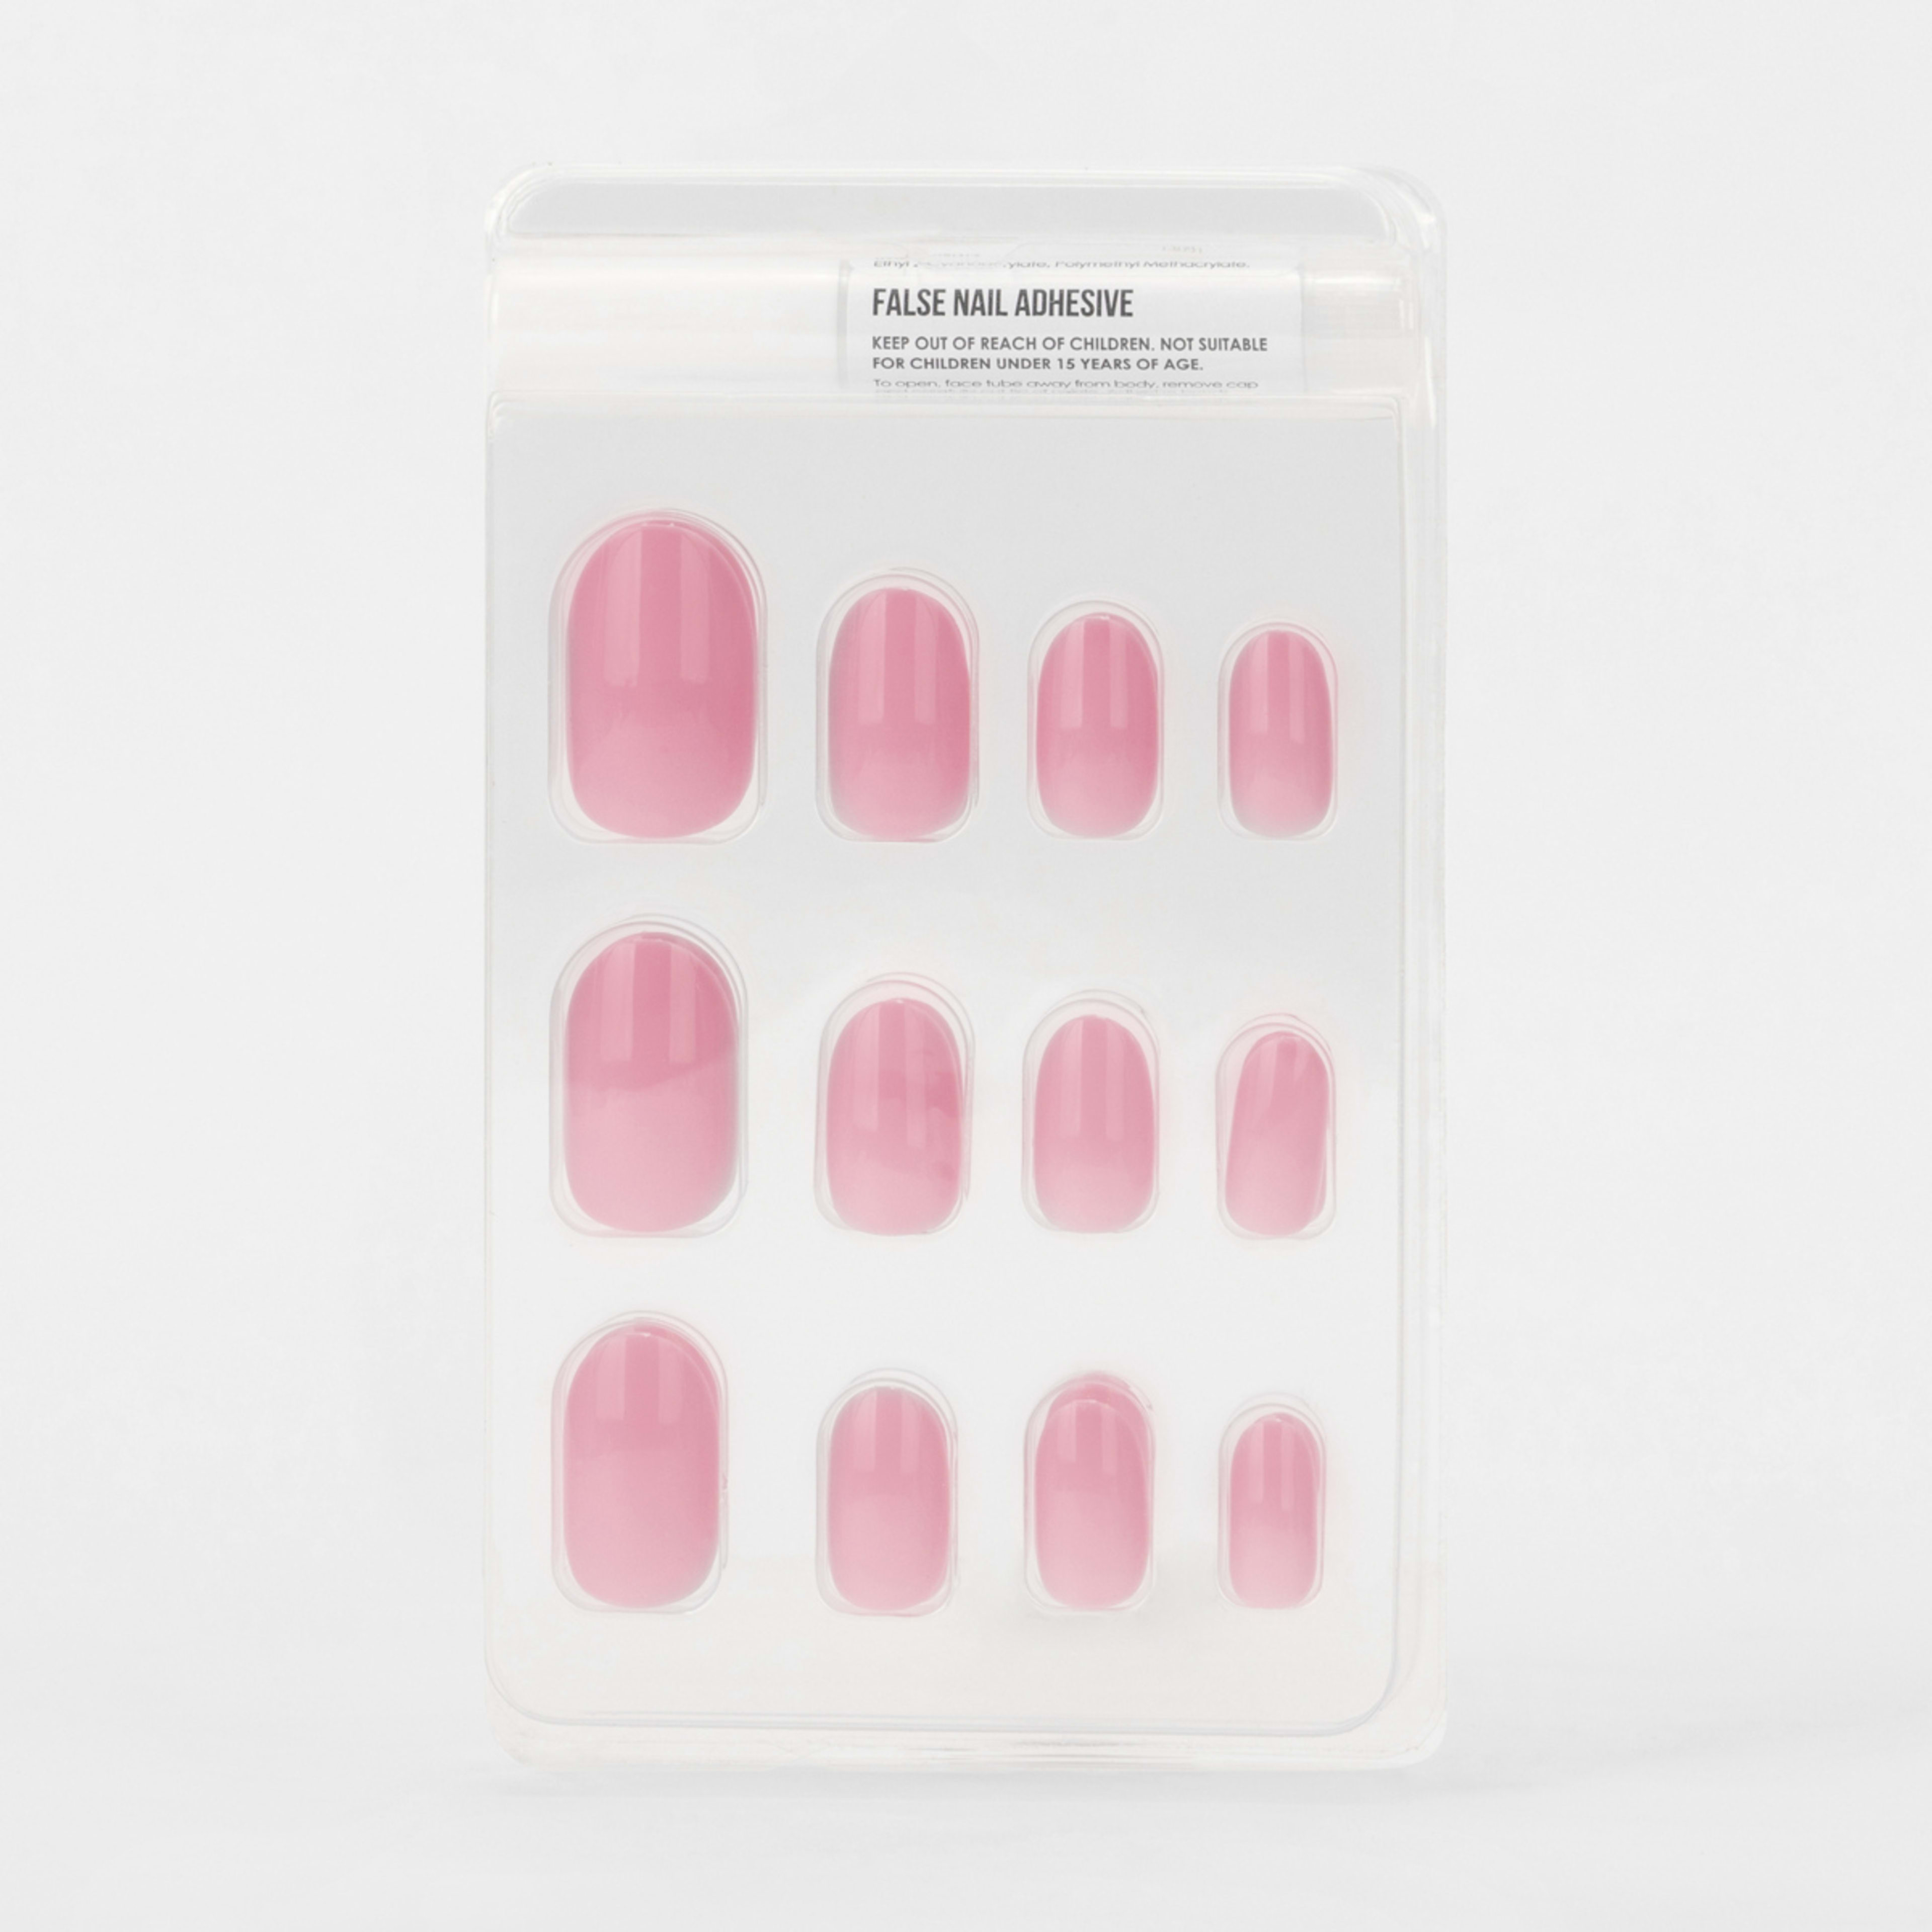 OXX Cosmetics 24 Pack False Nails with Adhesive - Oval Shape, Candy ...